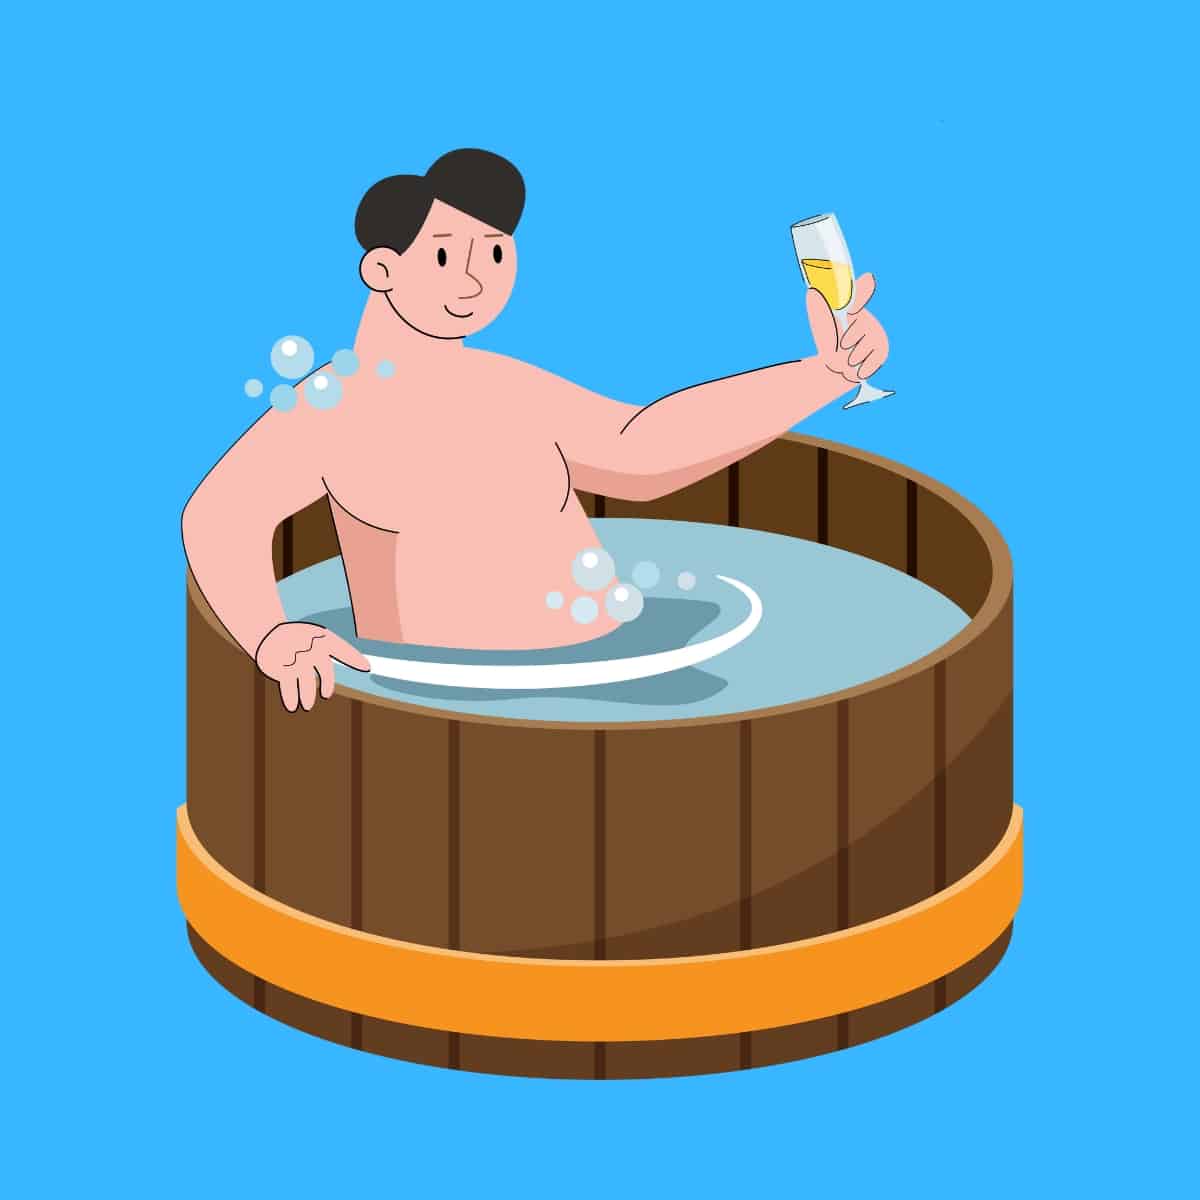 Cartoon graphic of a man in a hot tub holding a glass of champagne on a blue background.